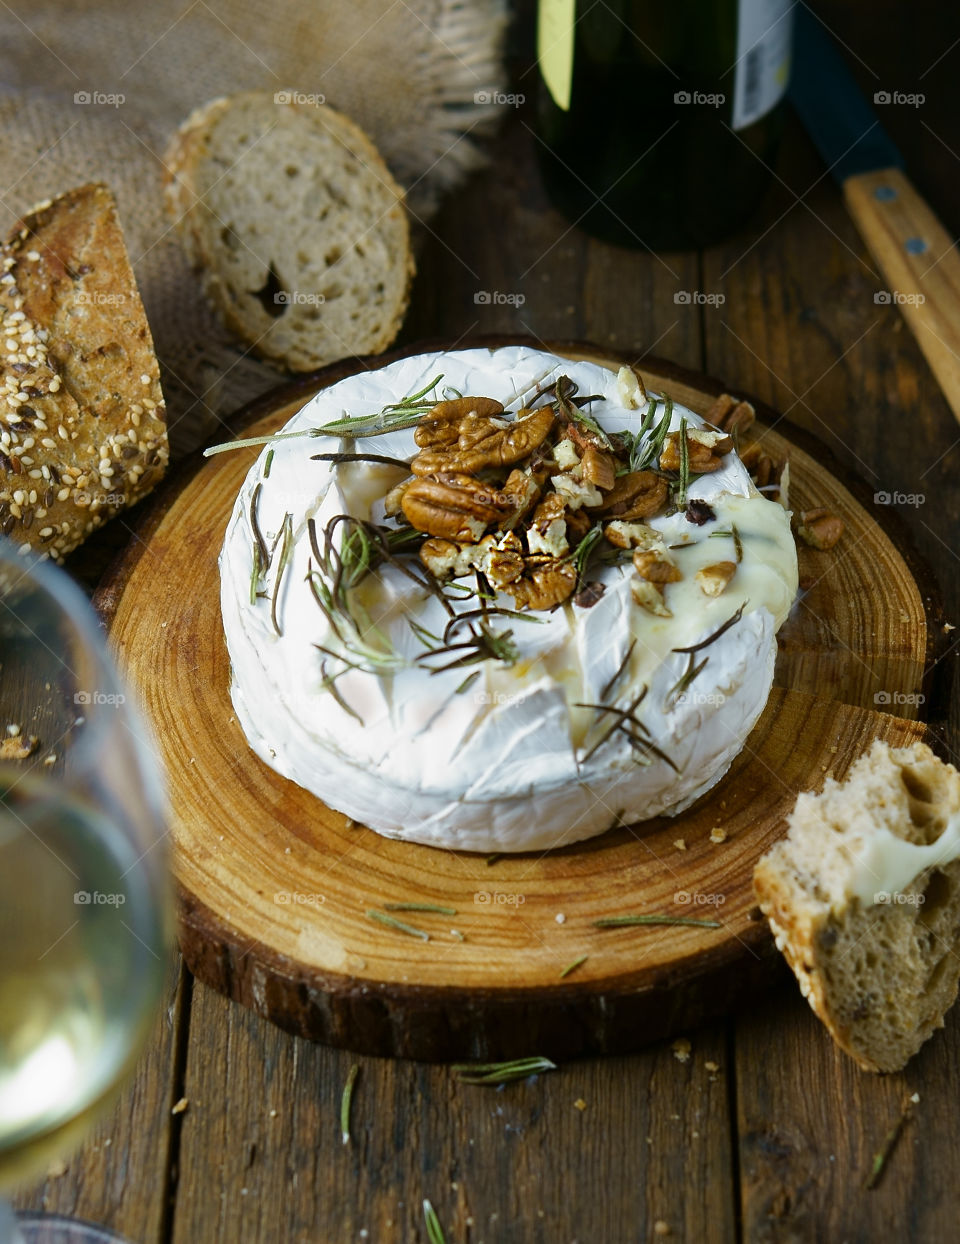 Baked camembert cheese